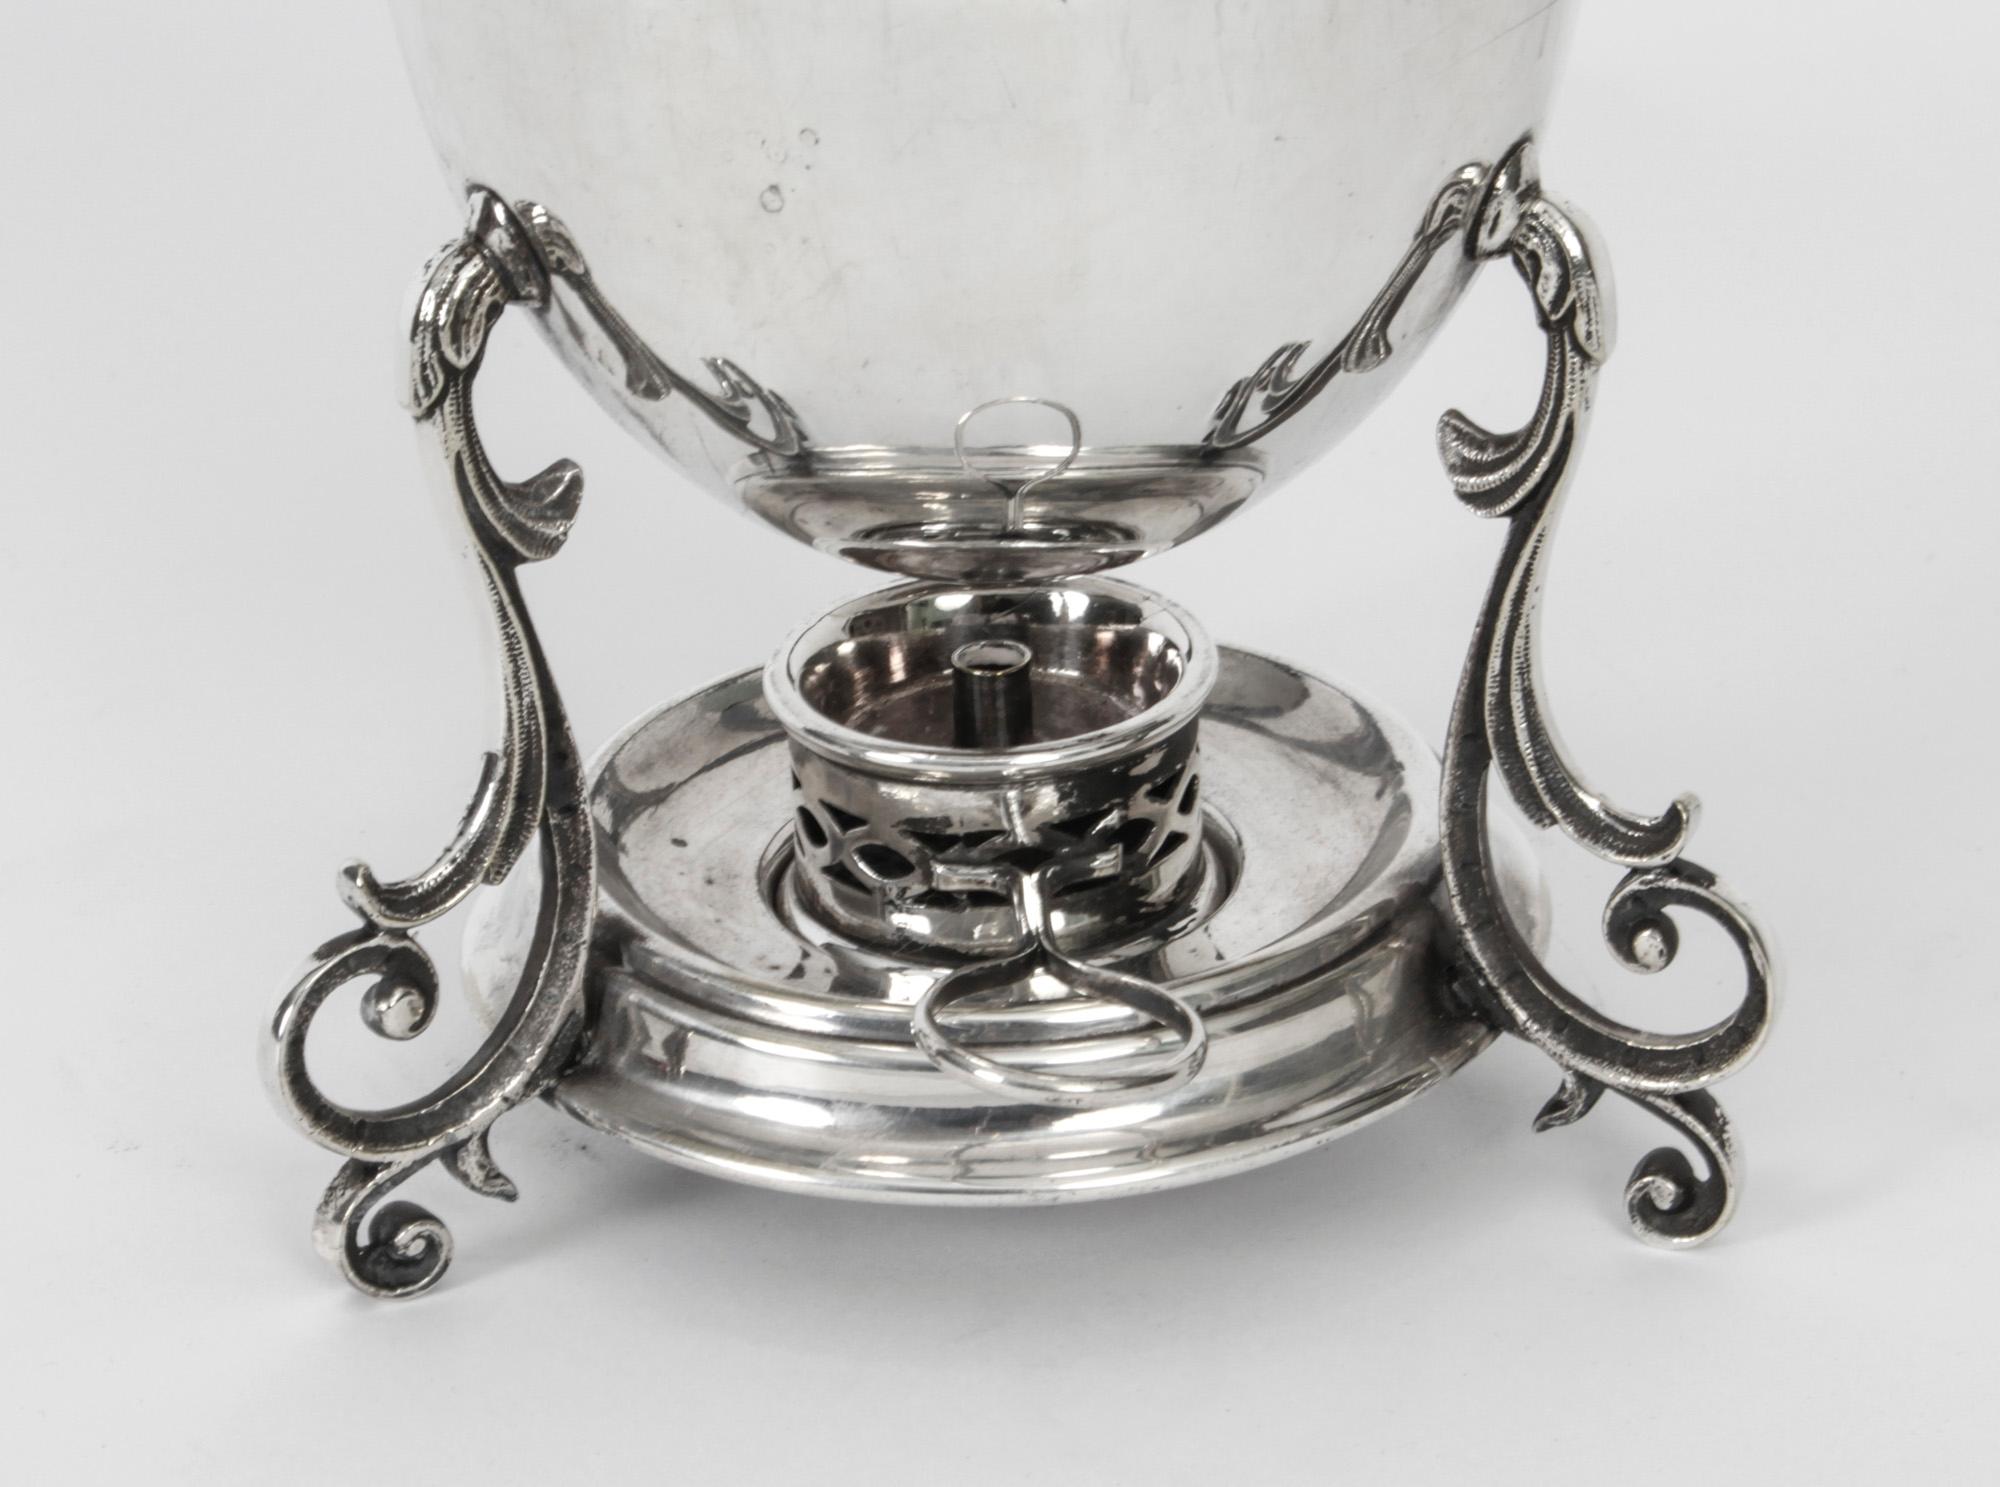 Antique Victorian Silver Plated Egg Coddler / Boiler, 19th Century 2